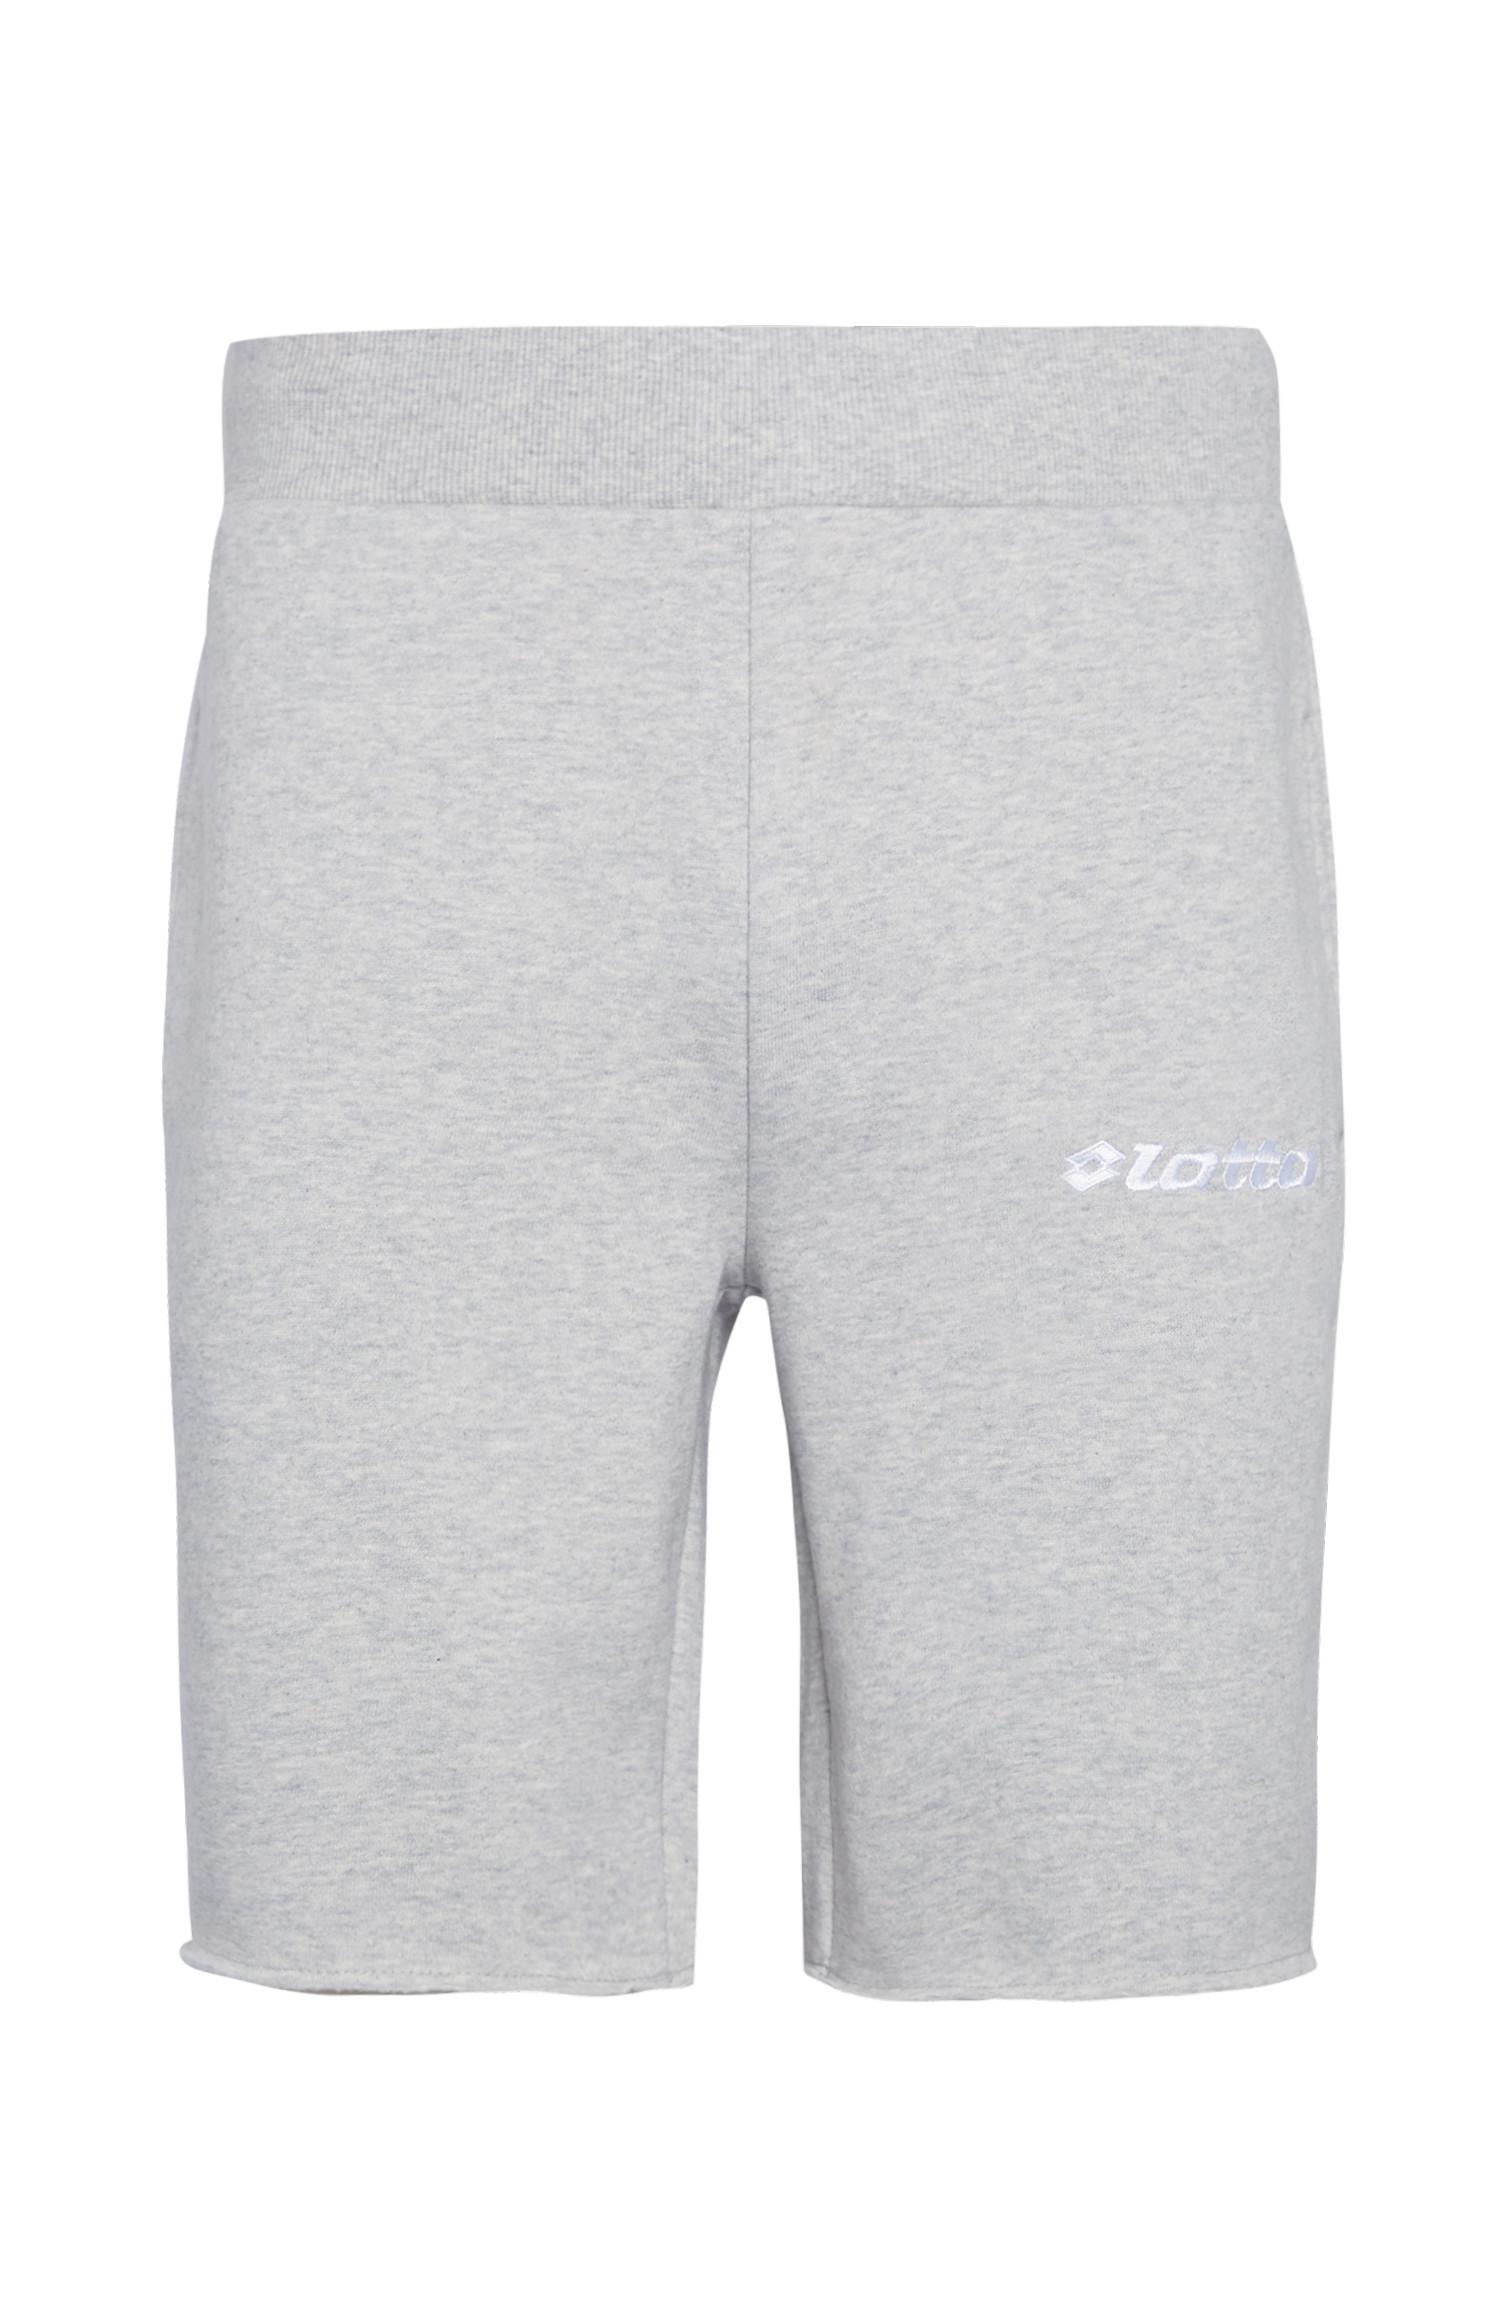 white cycling shorts primark